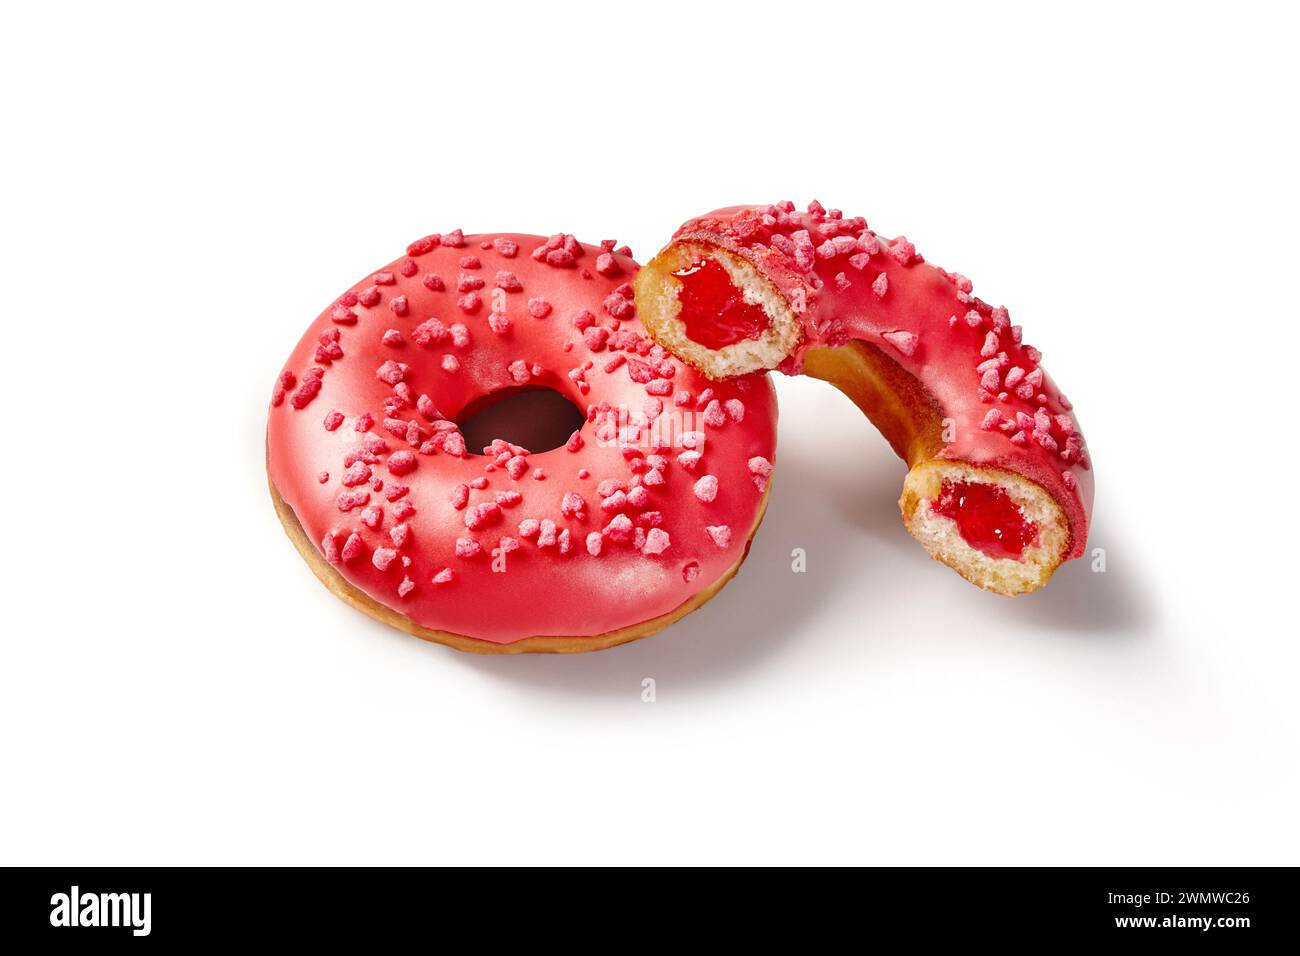 Vibrant red glazed soft donuts with sweet and sour berry jelly filling sprinkled with sugared berry crumbs, isolated on white background. Handcrafted Stock Photo